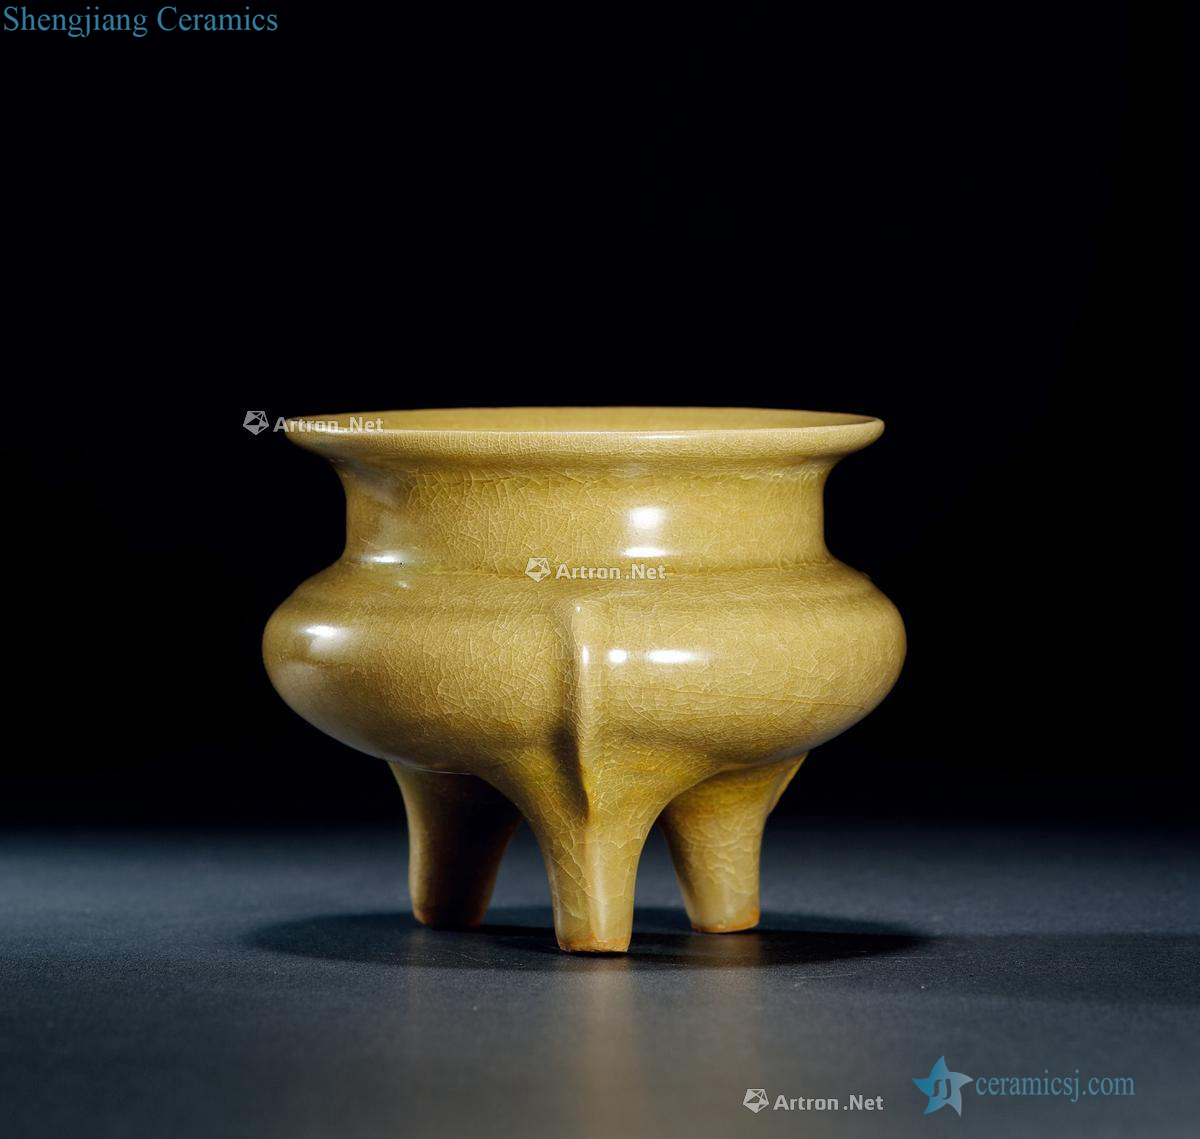 The southern song dynasty, longquan celadon cream-colored glaze by furnace